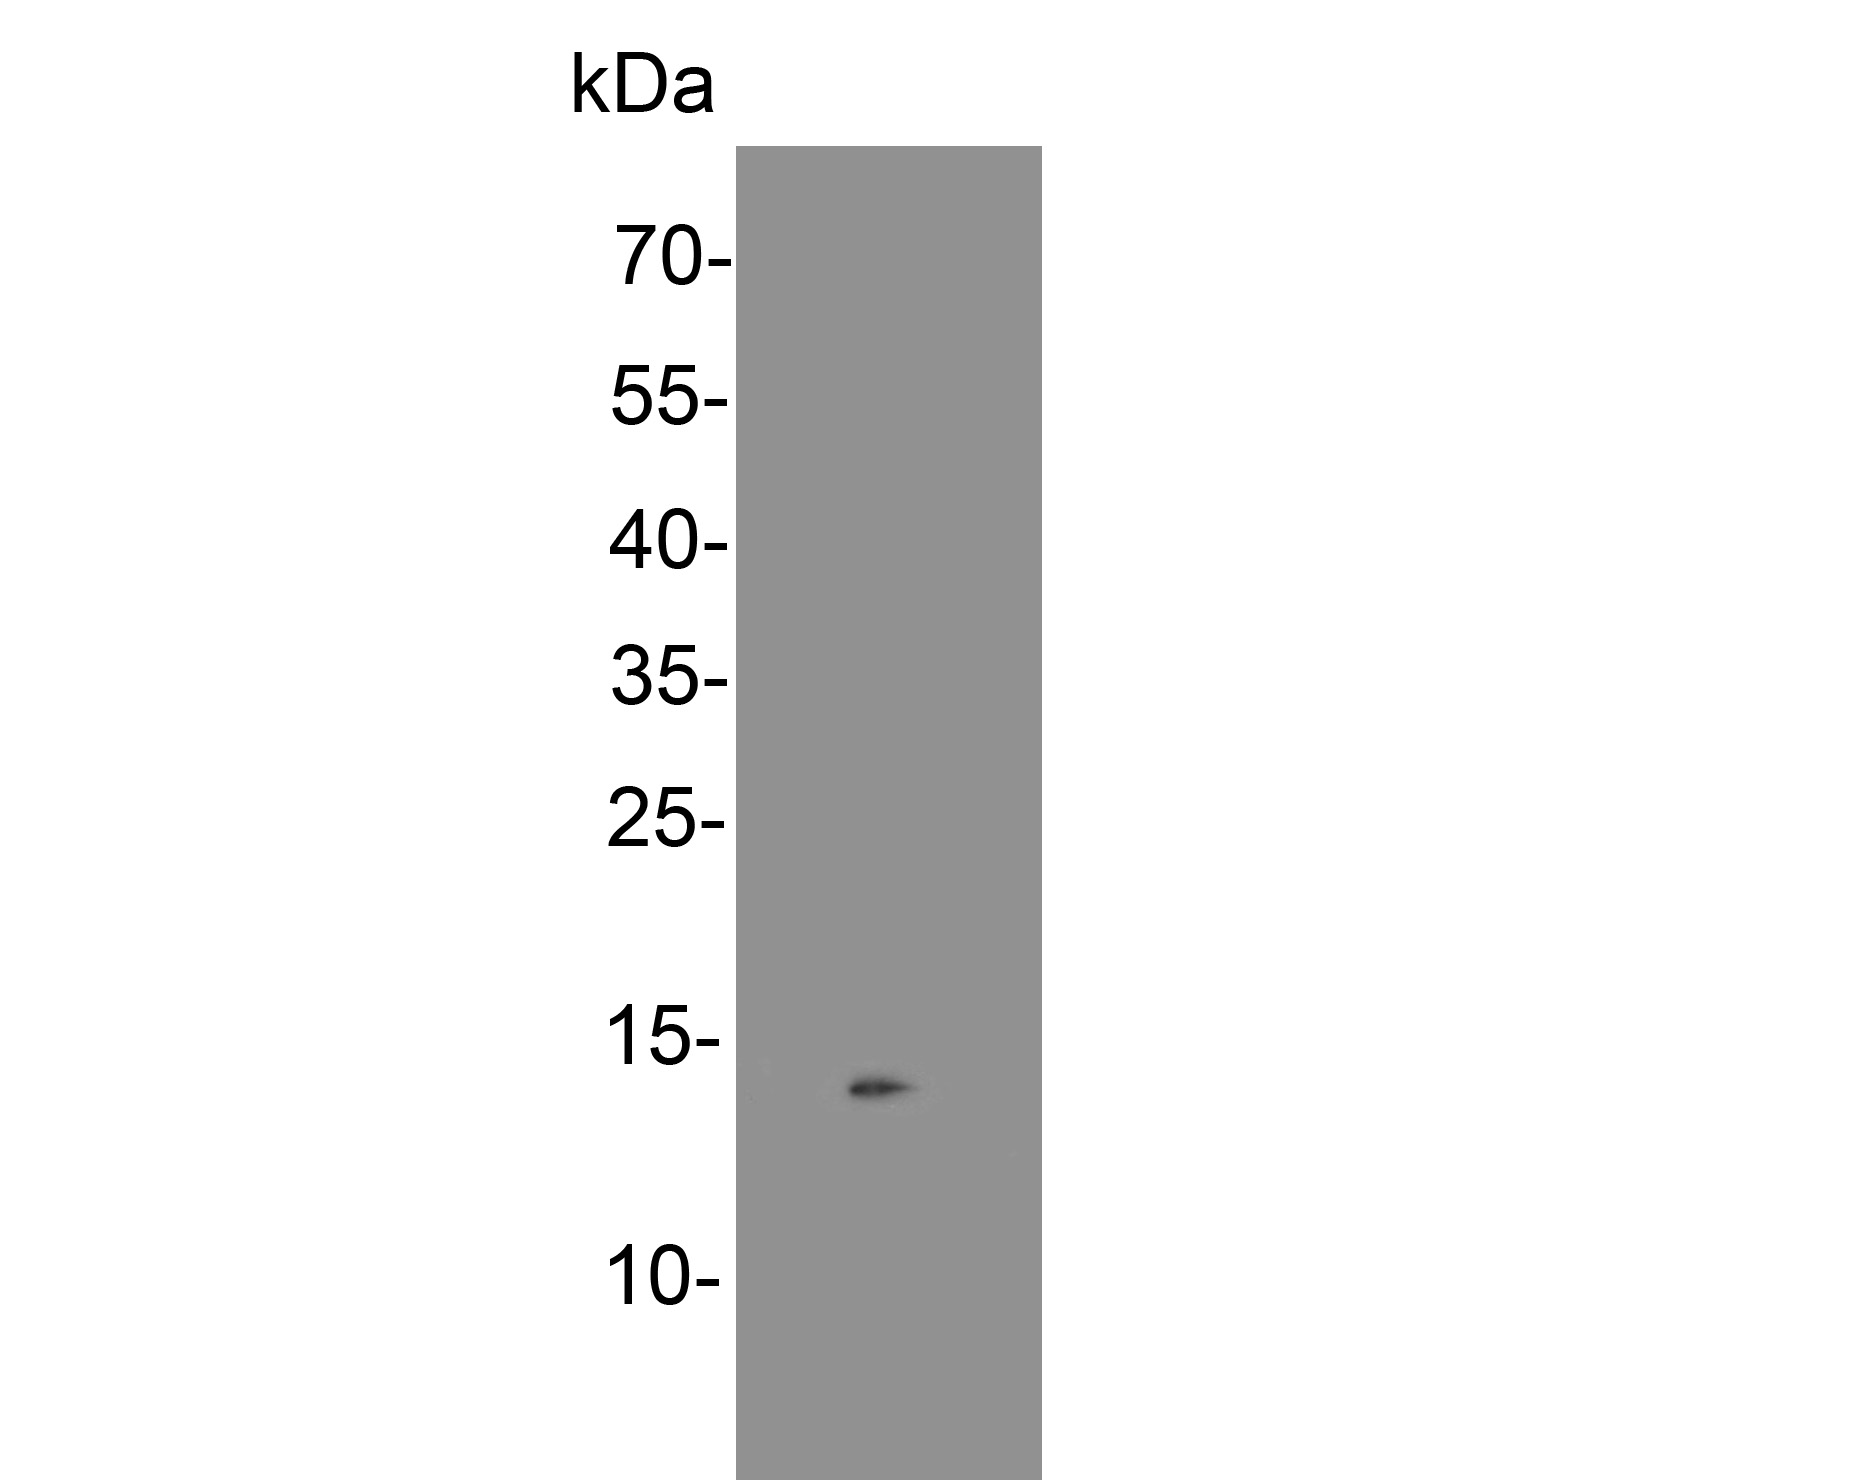 Western blot analysis of SNRPD3 on MCF-7 cell lysate. Proteins were transferred to a PVDF membrane and blocked with 5% NFDM/TBST for 1 hour at room temperature. The primary antibody (HA500254, 1/500) was used in 5% NFDM/TBST at room temperature for 2 hours. Goat Anti-Rabbit IgG - HRP Secondary Antibody (HA1001) at 1:200,000 dilution was used for 1 hour at room temperature.